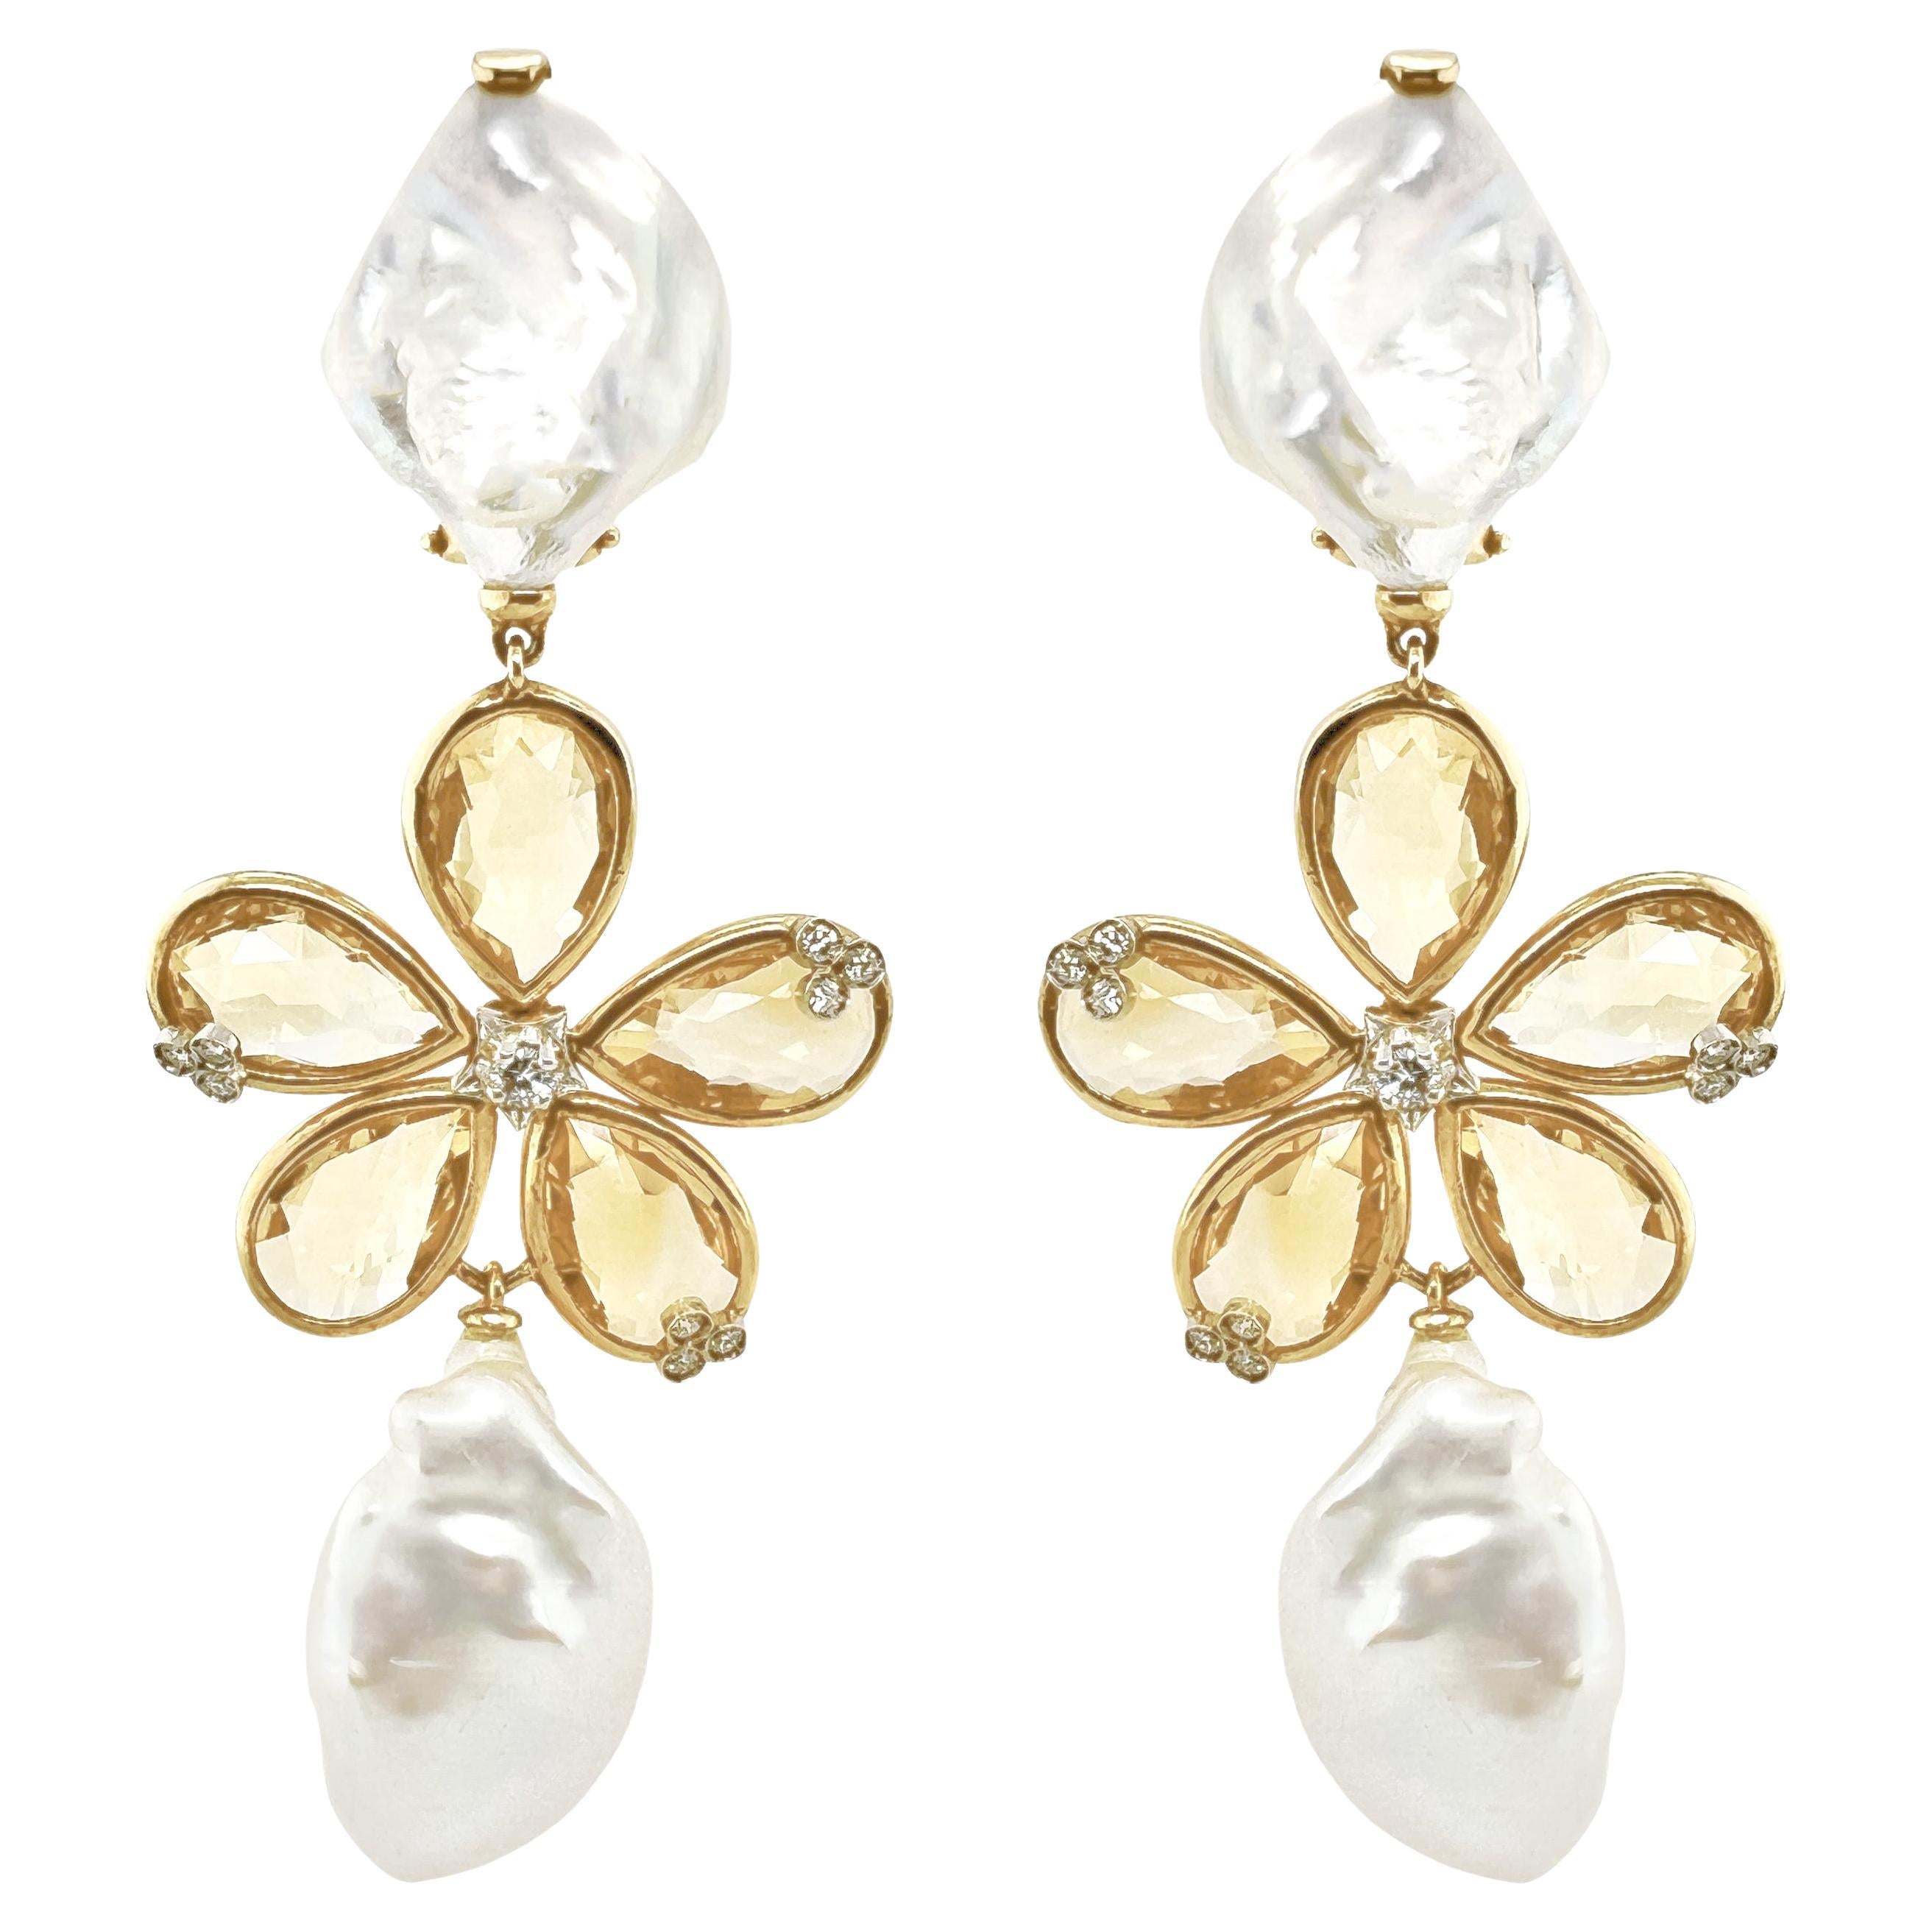 18kt Yellow Gold earrings with flower in Citrine quartz, pearls and diamond